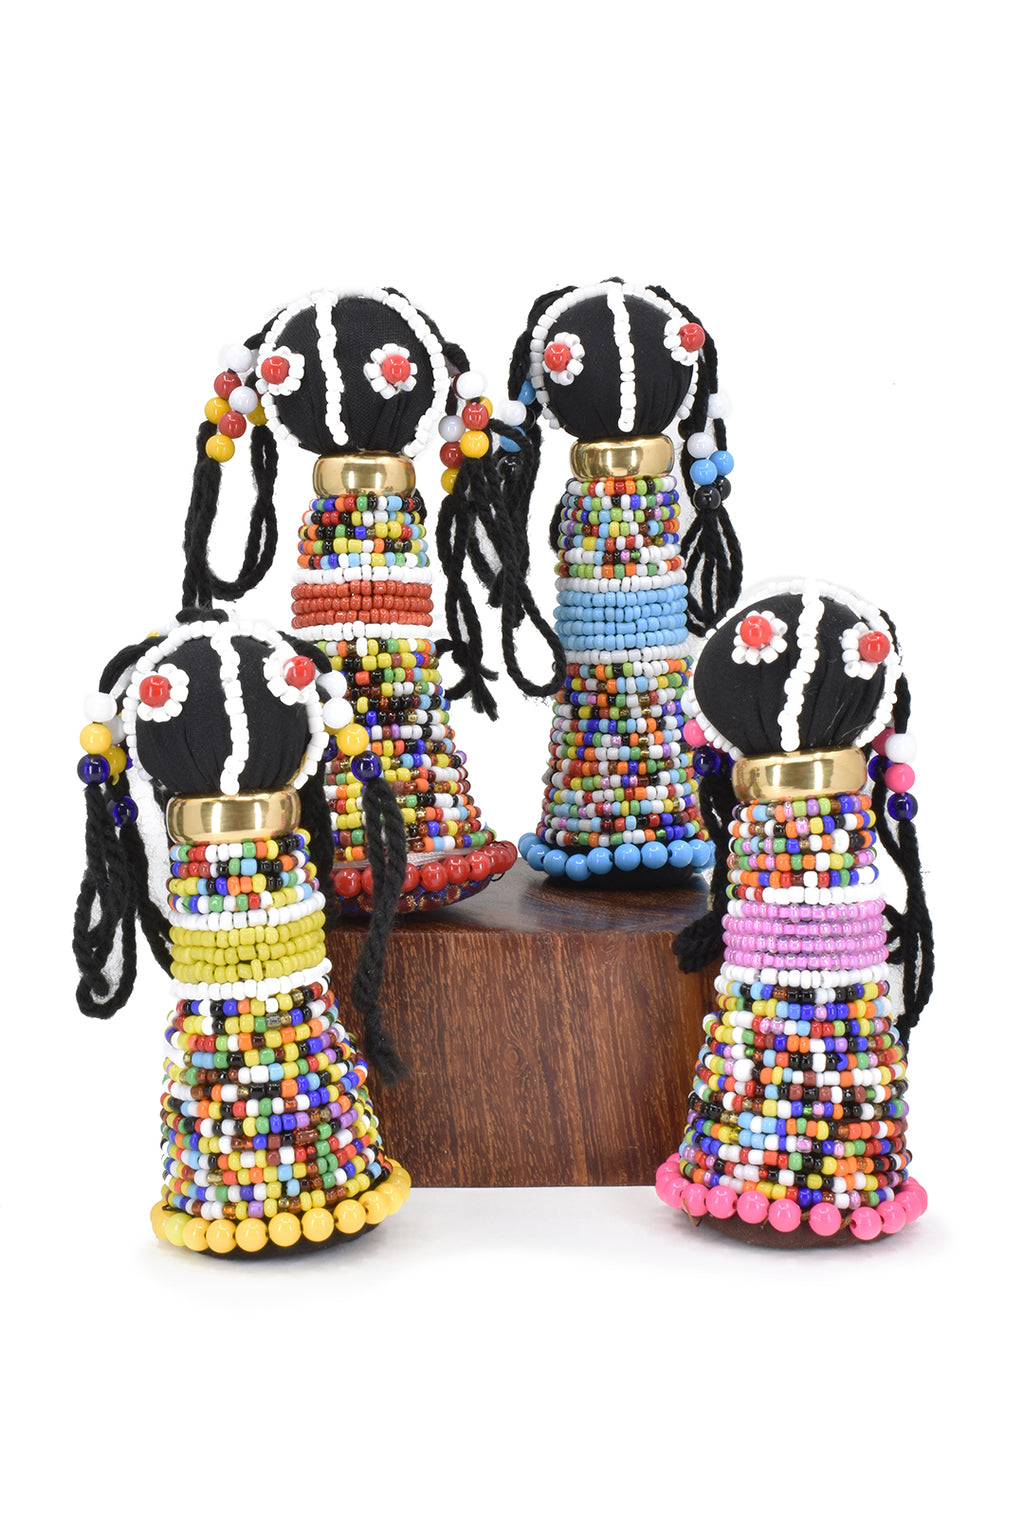 Large South African Ndebele Doll Sculpture